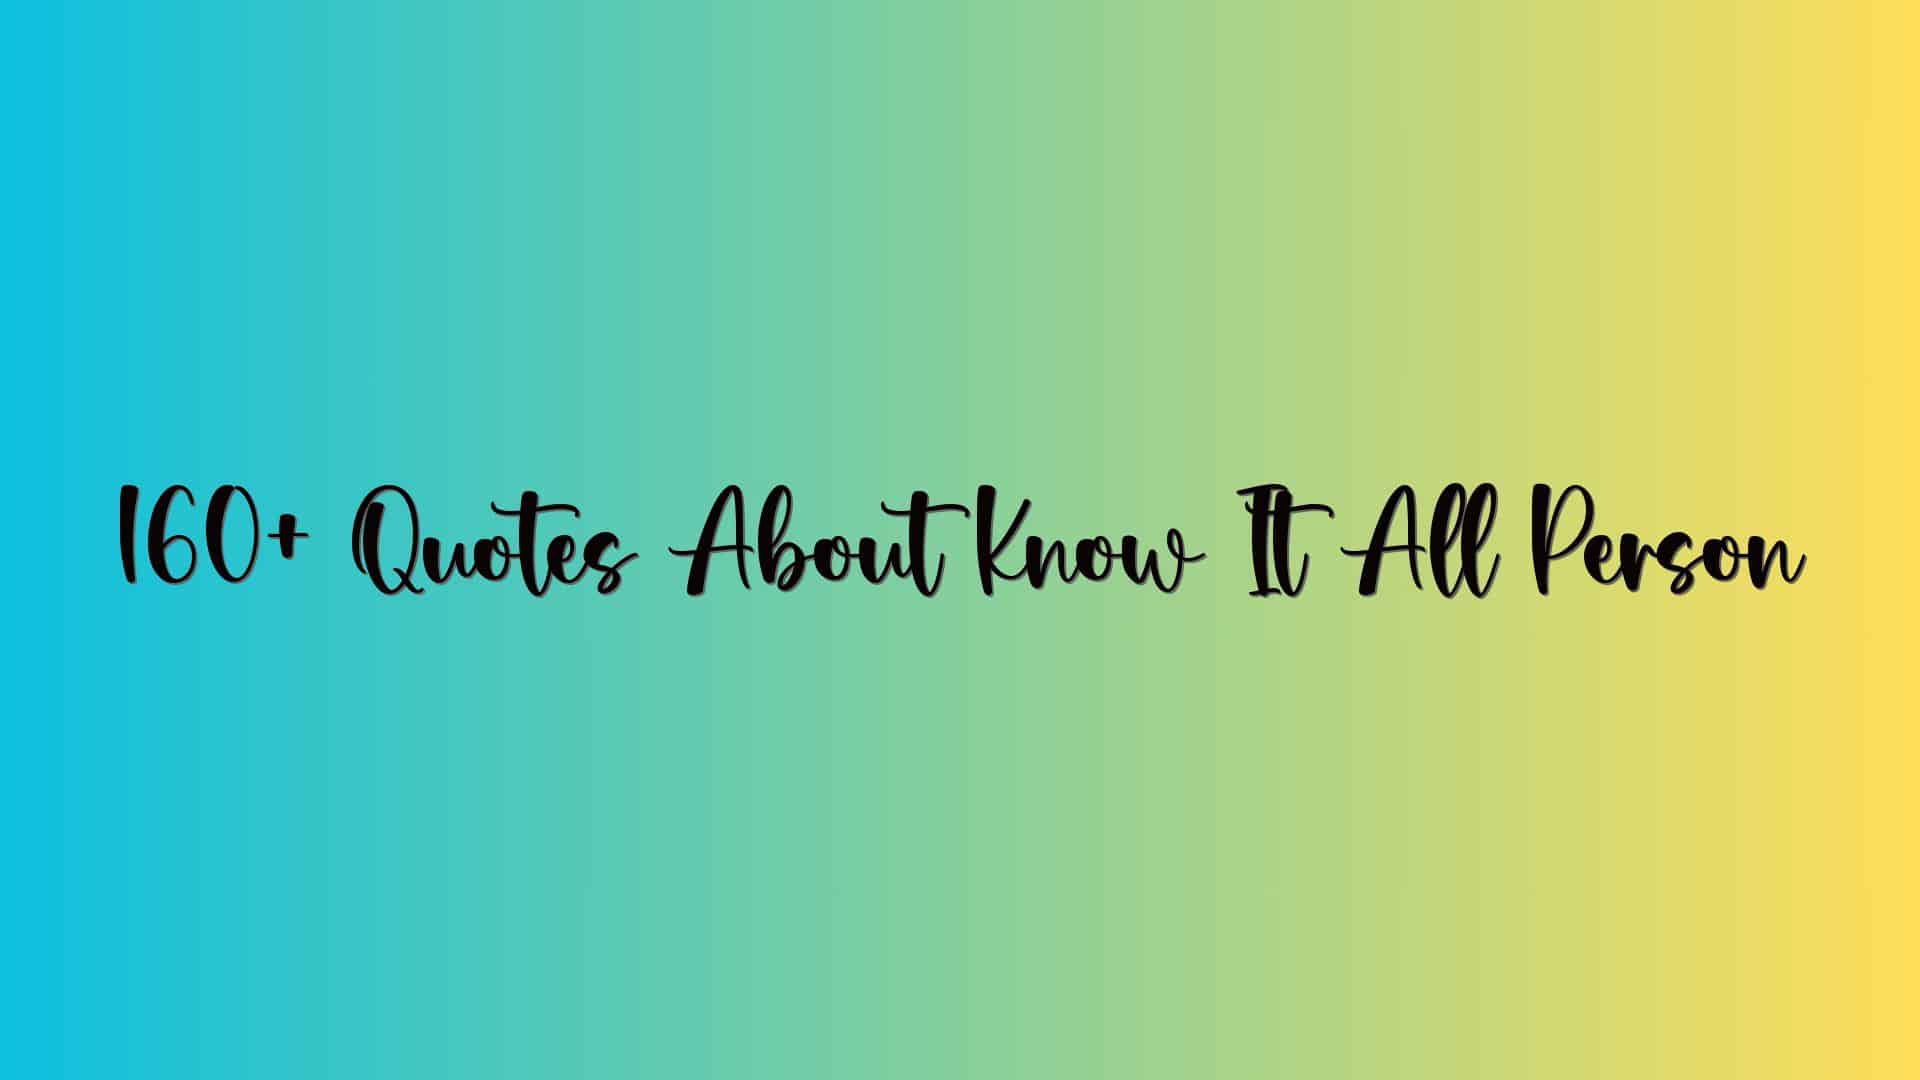 160+ Quotes About Know It All Person